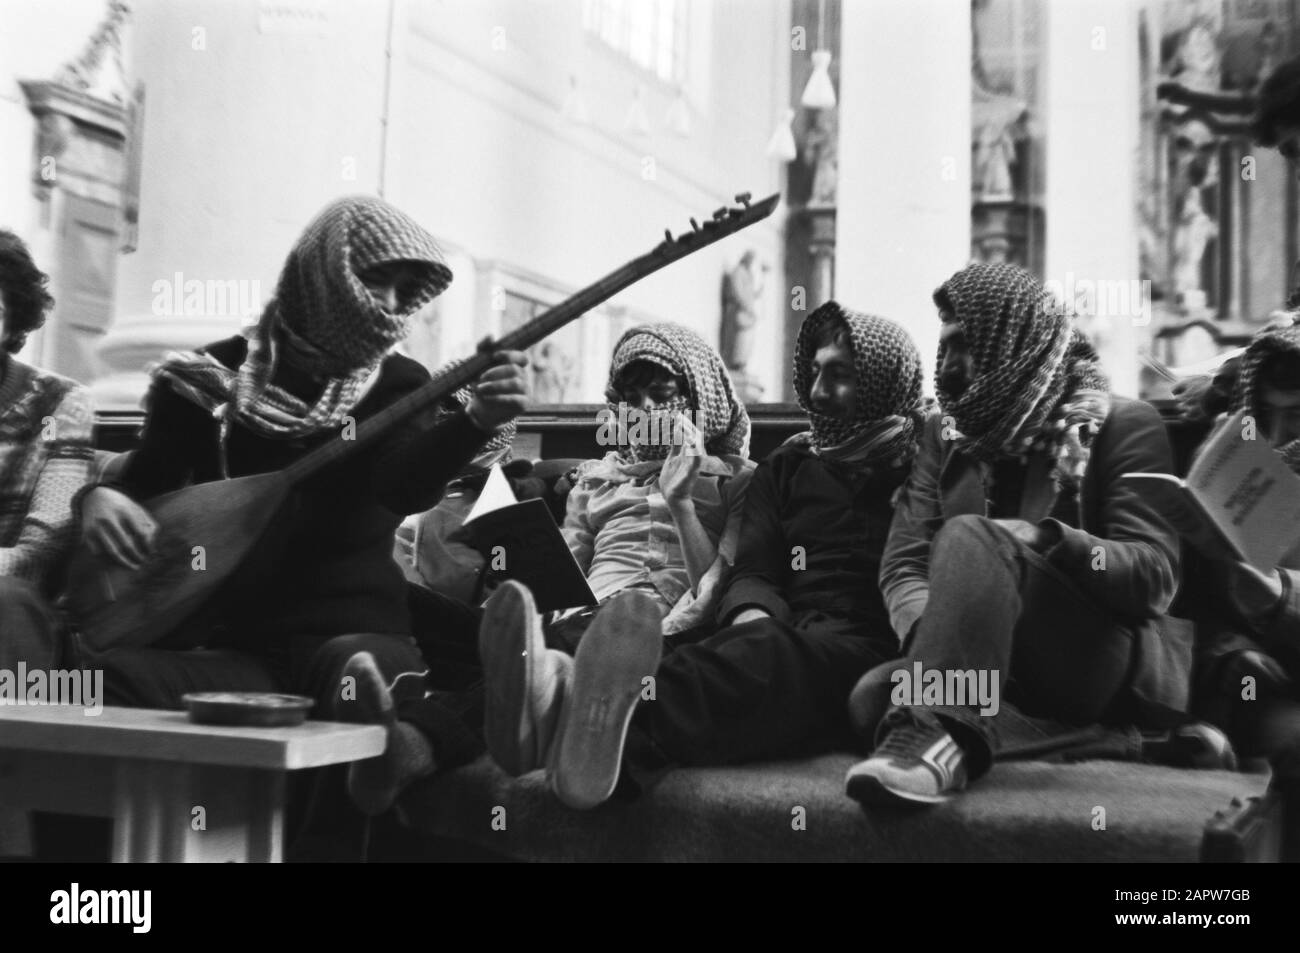 Kurdish Turks still in Moses and Aaronkerk in Amsterdam, in protest against the trials against Kurds in Turkey Date: April 18, 1981 Location: Amsterdam, Noord-Holland Keywords: protests Institutional name: Moses and Aaron Church Stock Photo